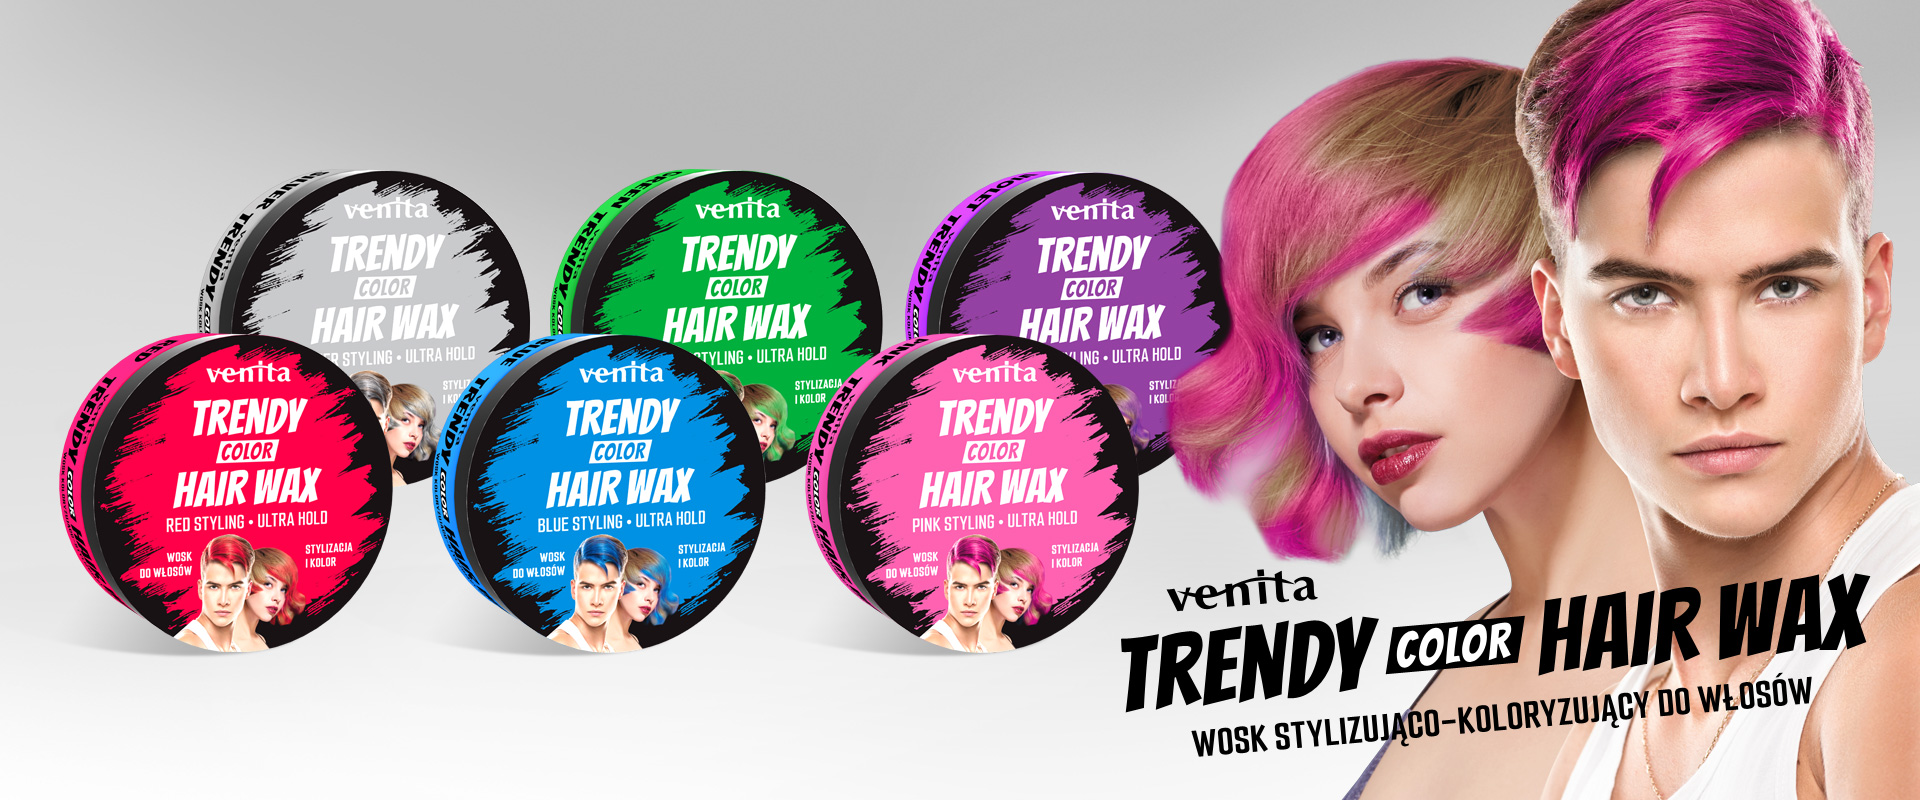 Hair Wax packagings and young couple